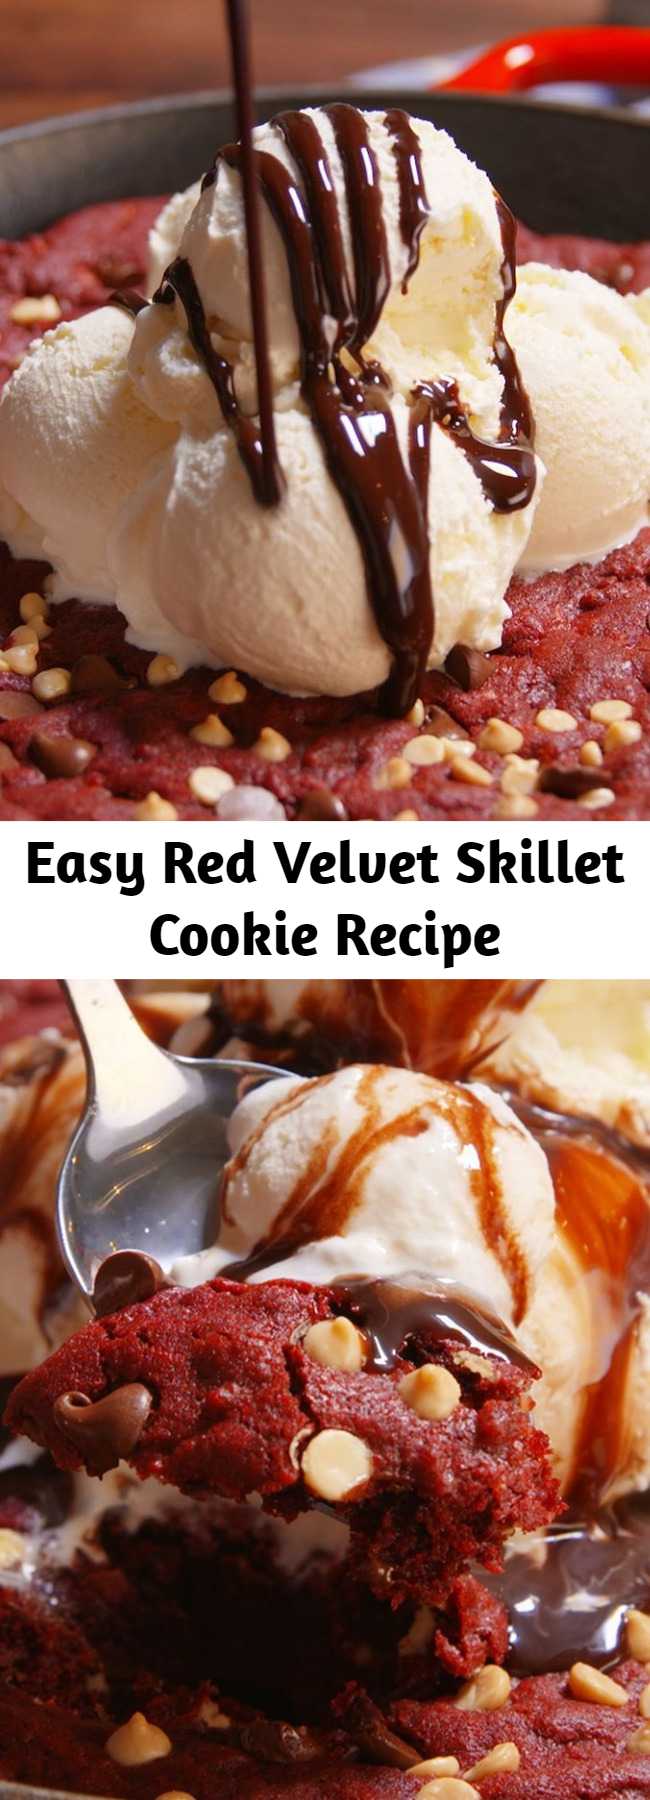 Easy Red Velvet Skillet Cookie Recipe - Looking for an easy red velvet dessert? This Red Velvet Skillet Cookie Recipe is the best. Grab a spoon and go at it.